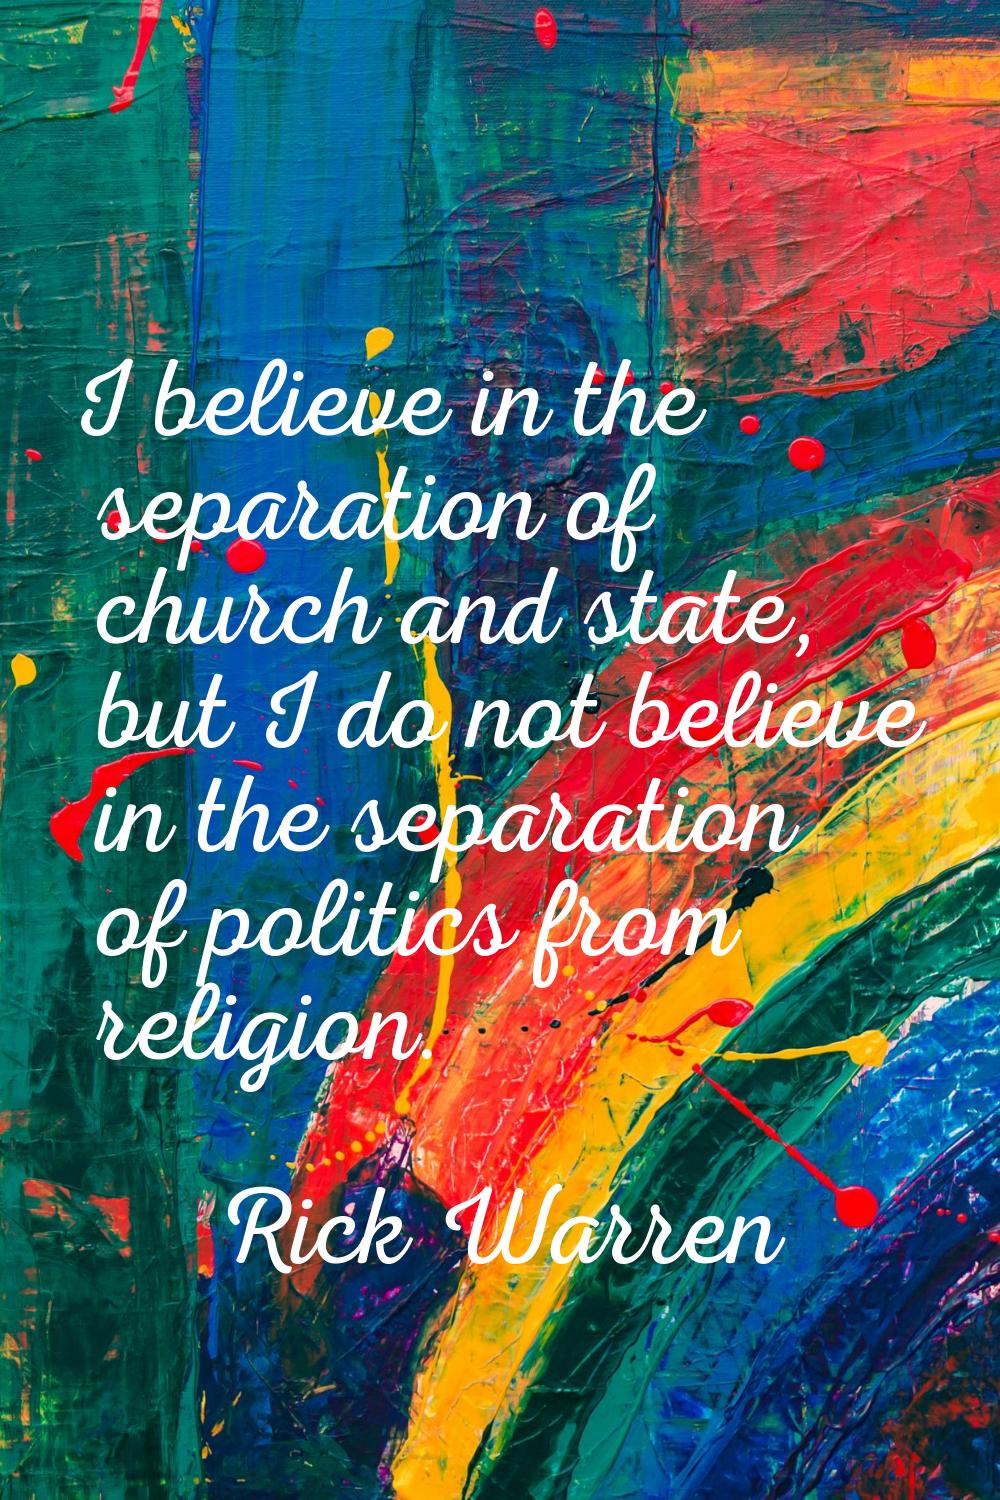 I believe in the separation of church and state, but I do not believe in the separation of politics